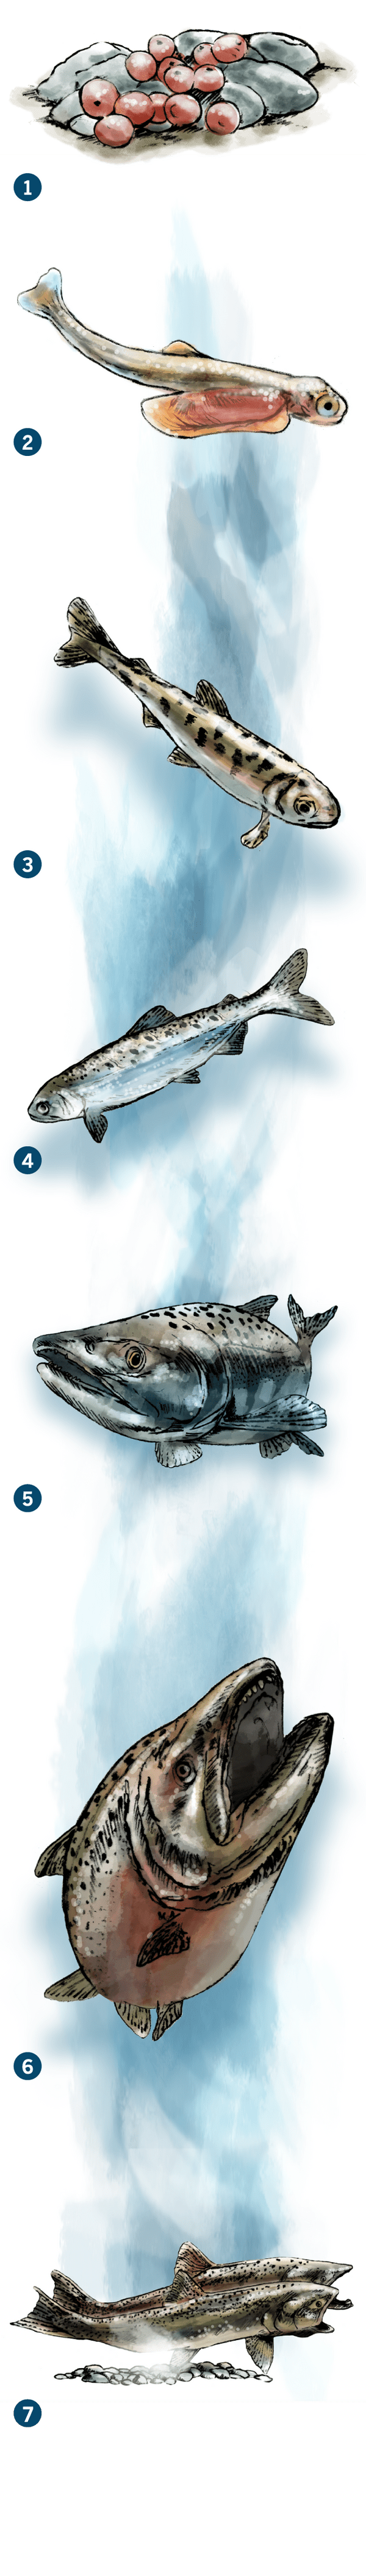 An illustration of salmon's life cycle